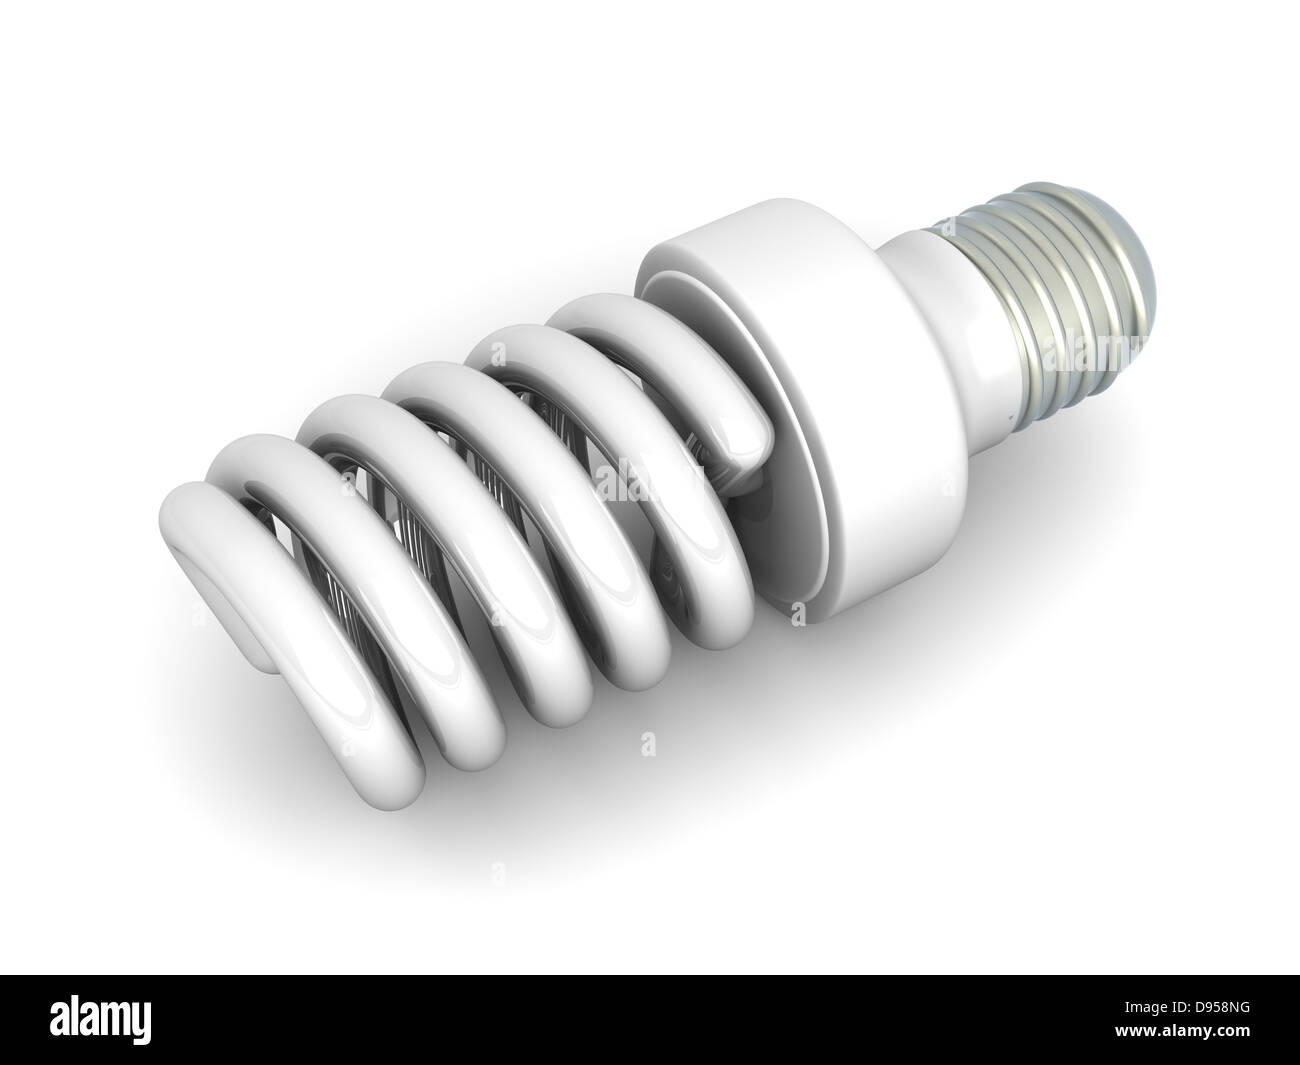 3D rendered Illustration. Isolated on white. Stock Photo